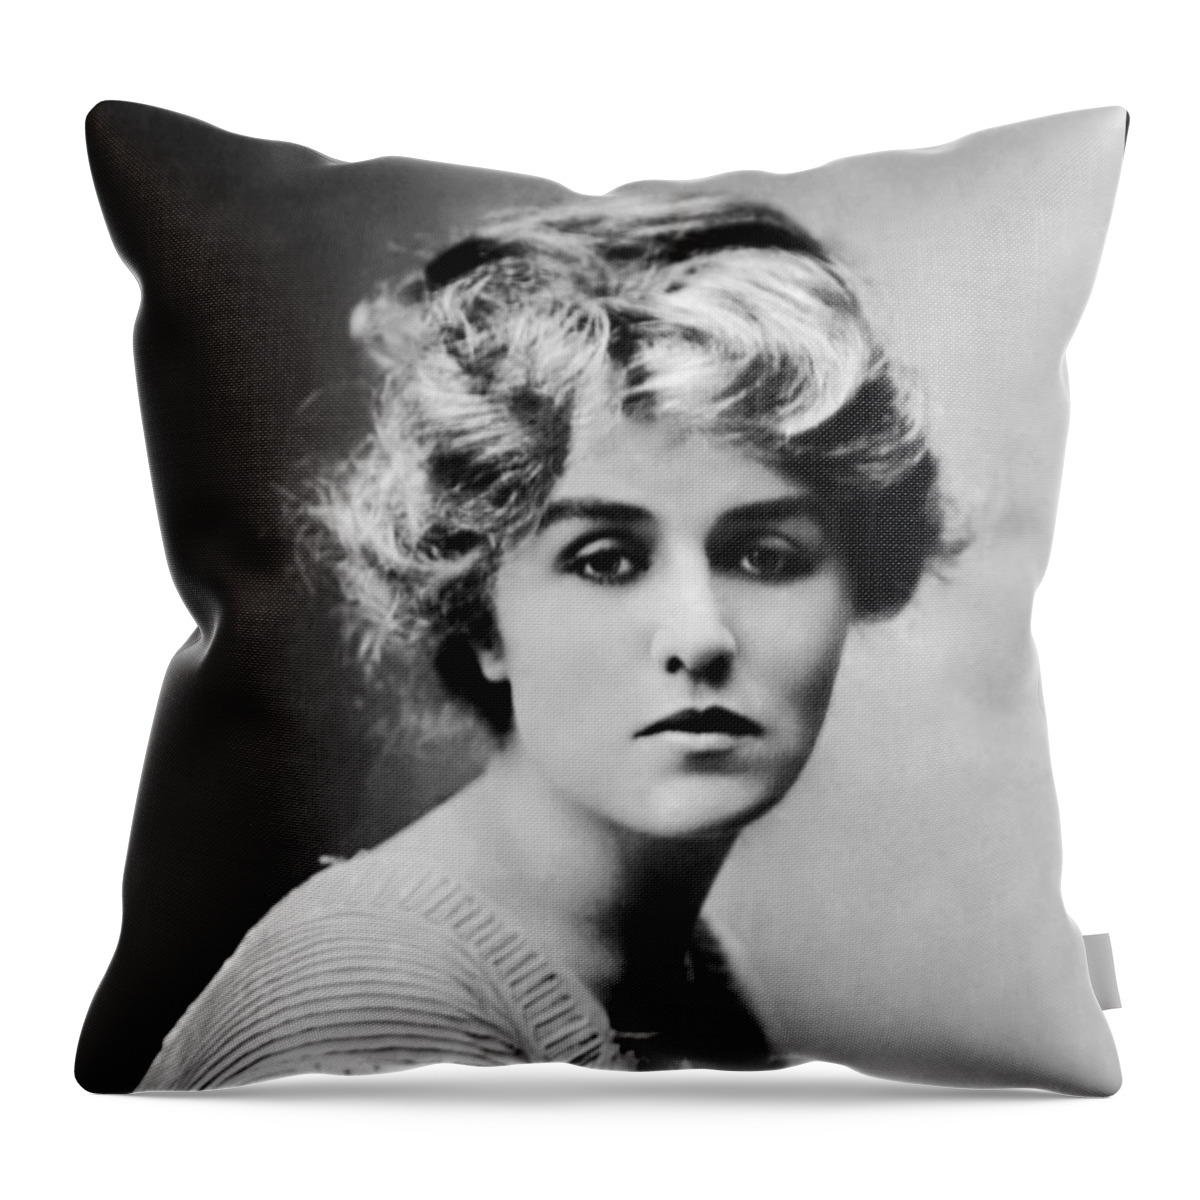 Emily Stevens Throw Pillow featuring the photograph Emily Stevens by Sad Hill - Bizarre Los Angeles Archive